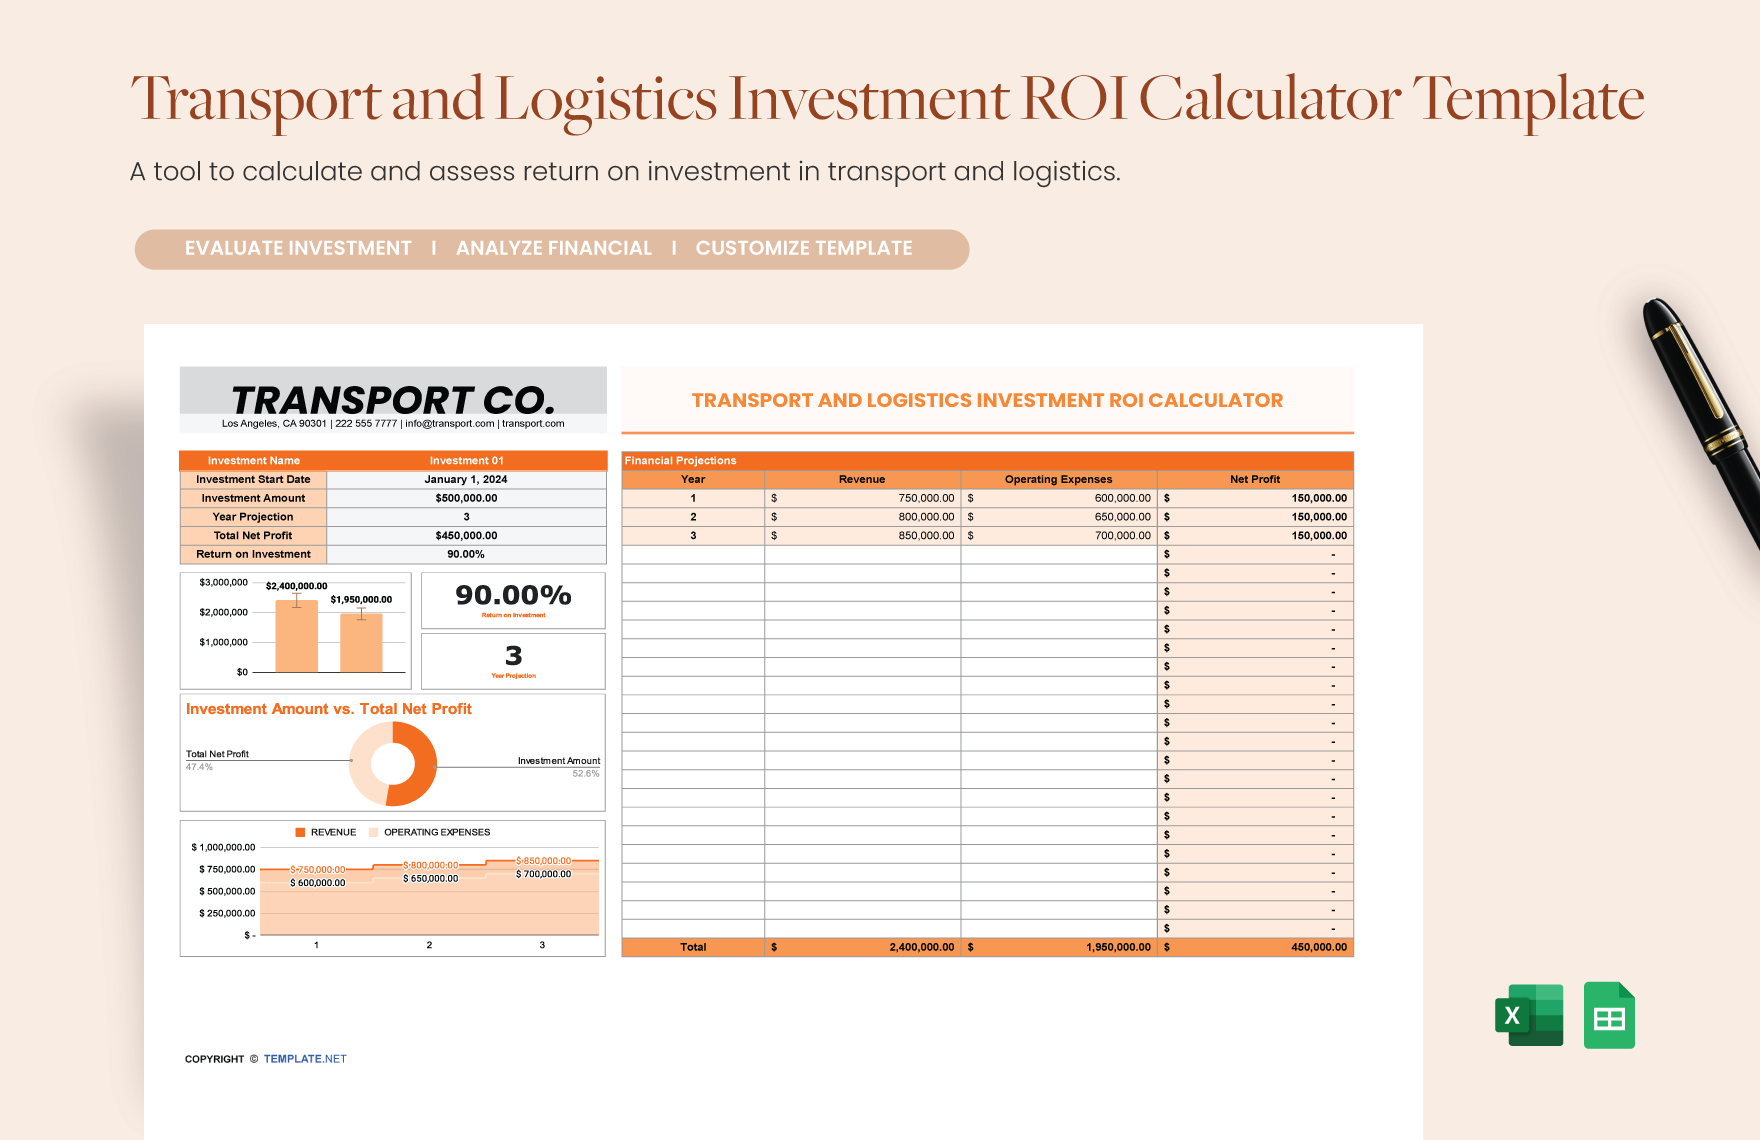 Free Transport and Logistics Investment ROI Calculator Template